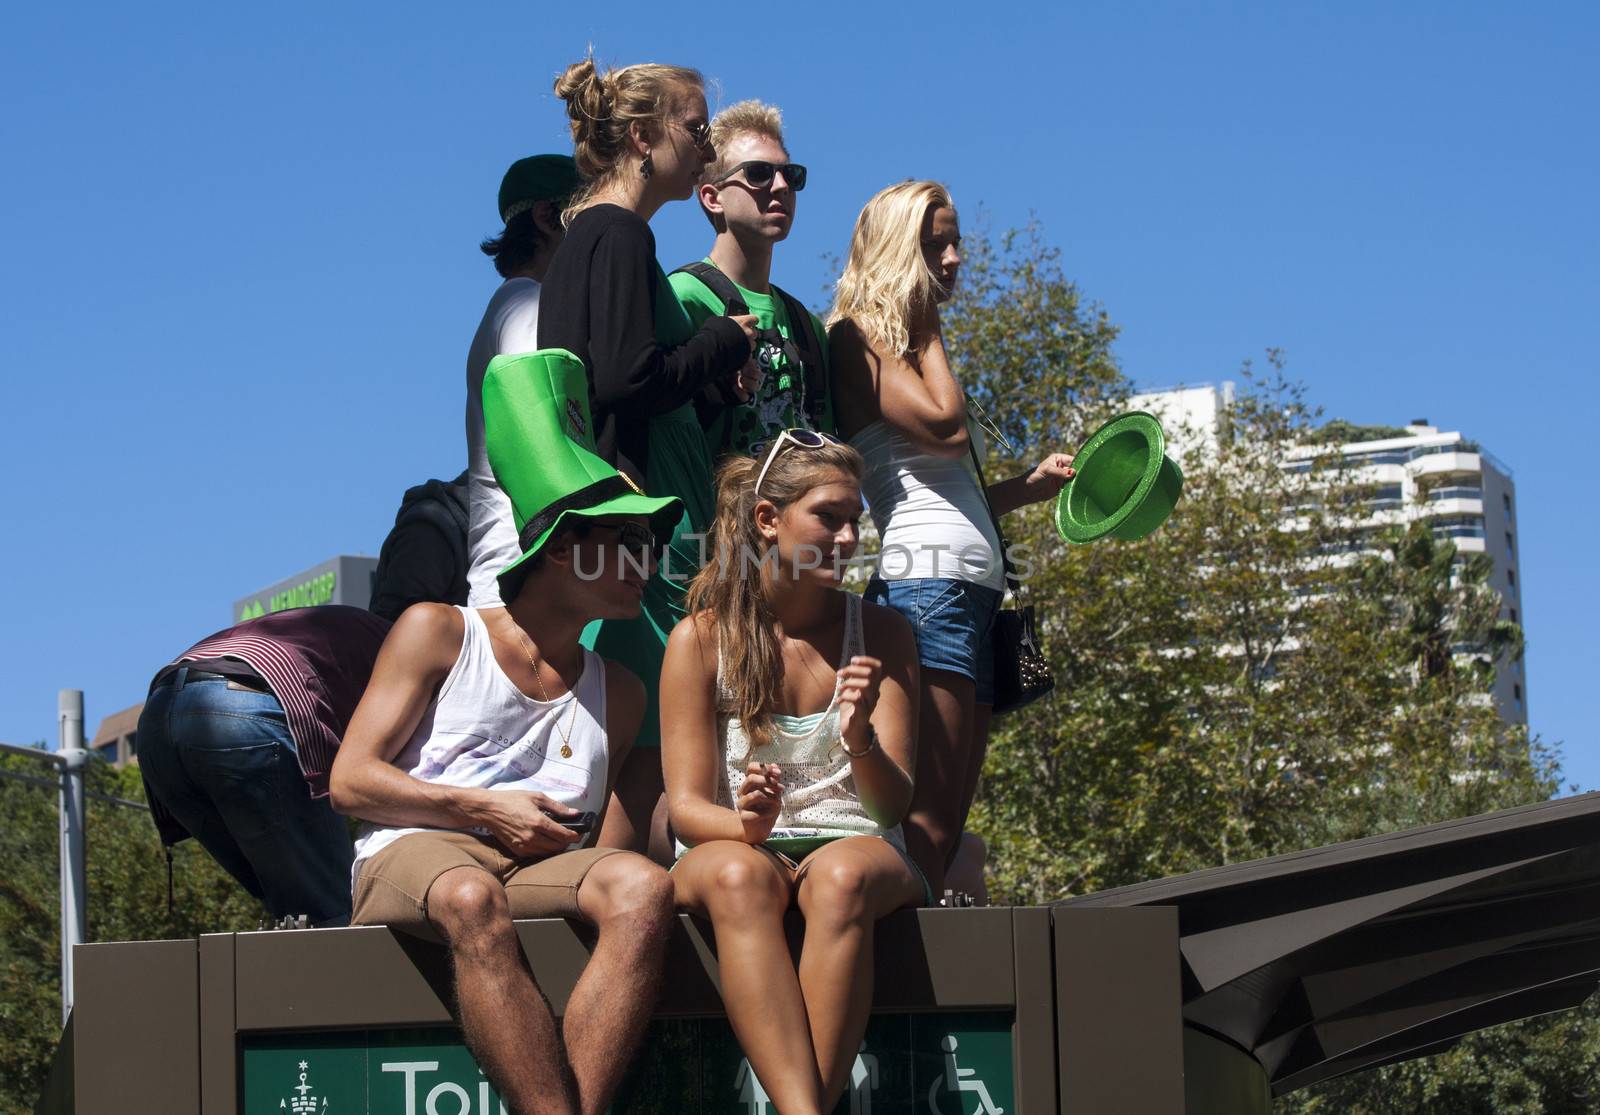 SYDNEY, AUSTRALIA - Mar 17TH: Watching the  St Patrick's Day parade on March 17th 2013. Australia has marked the occasion since 1810